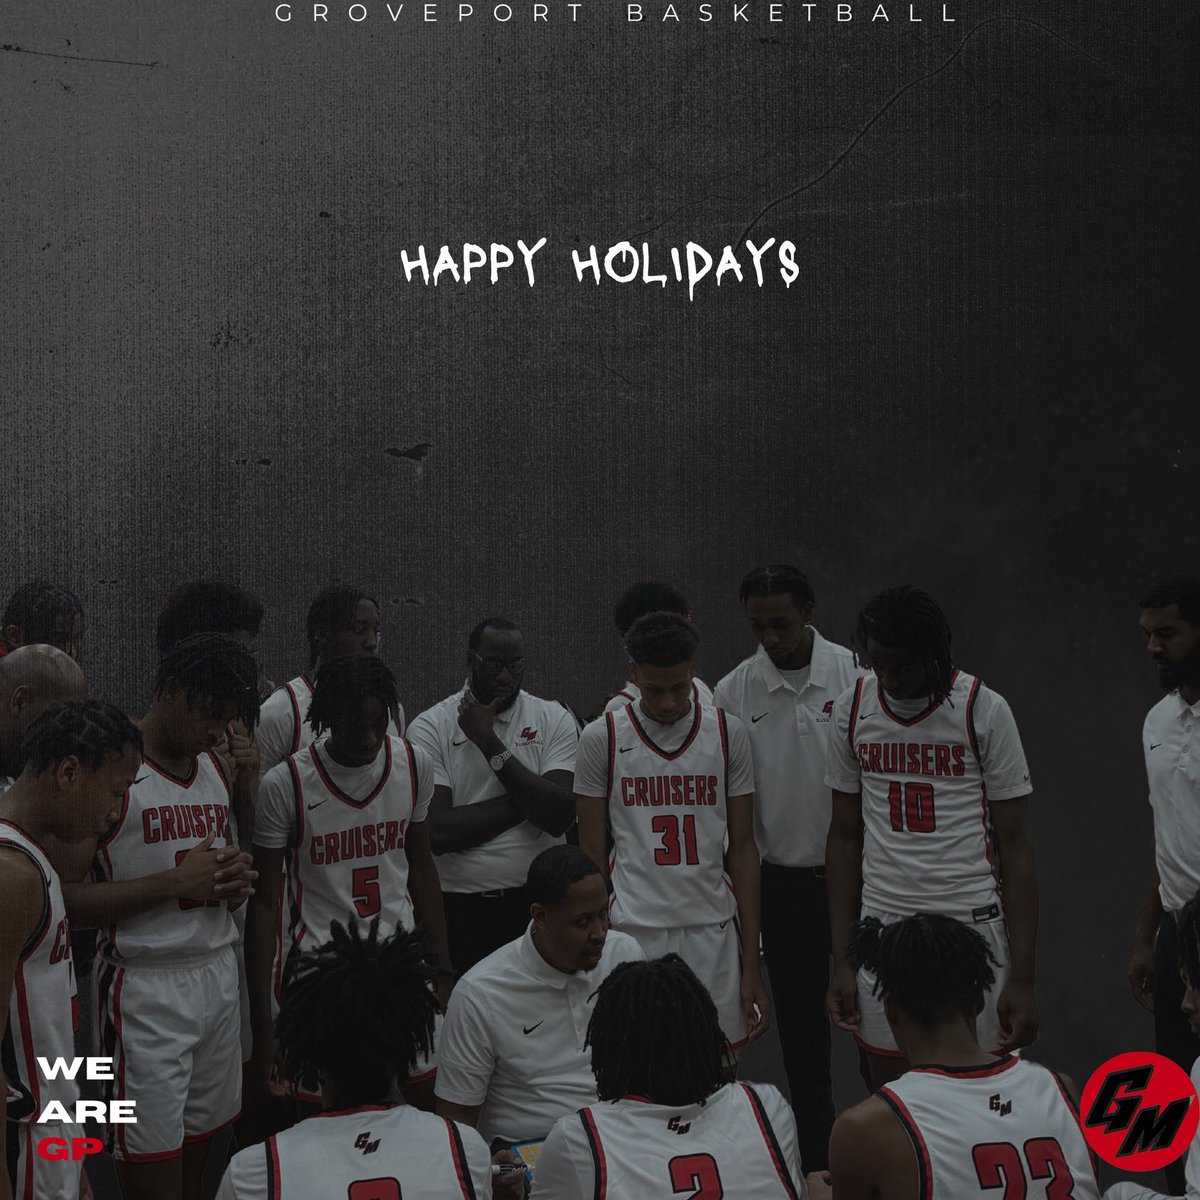 Merry Christmas & Happy Holidays from the Cruisers!!🏀🏀